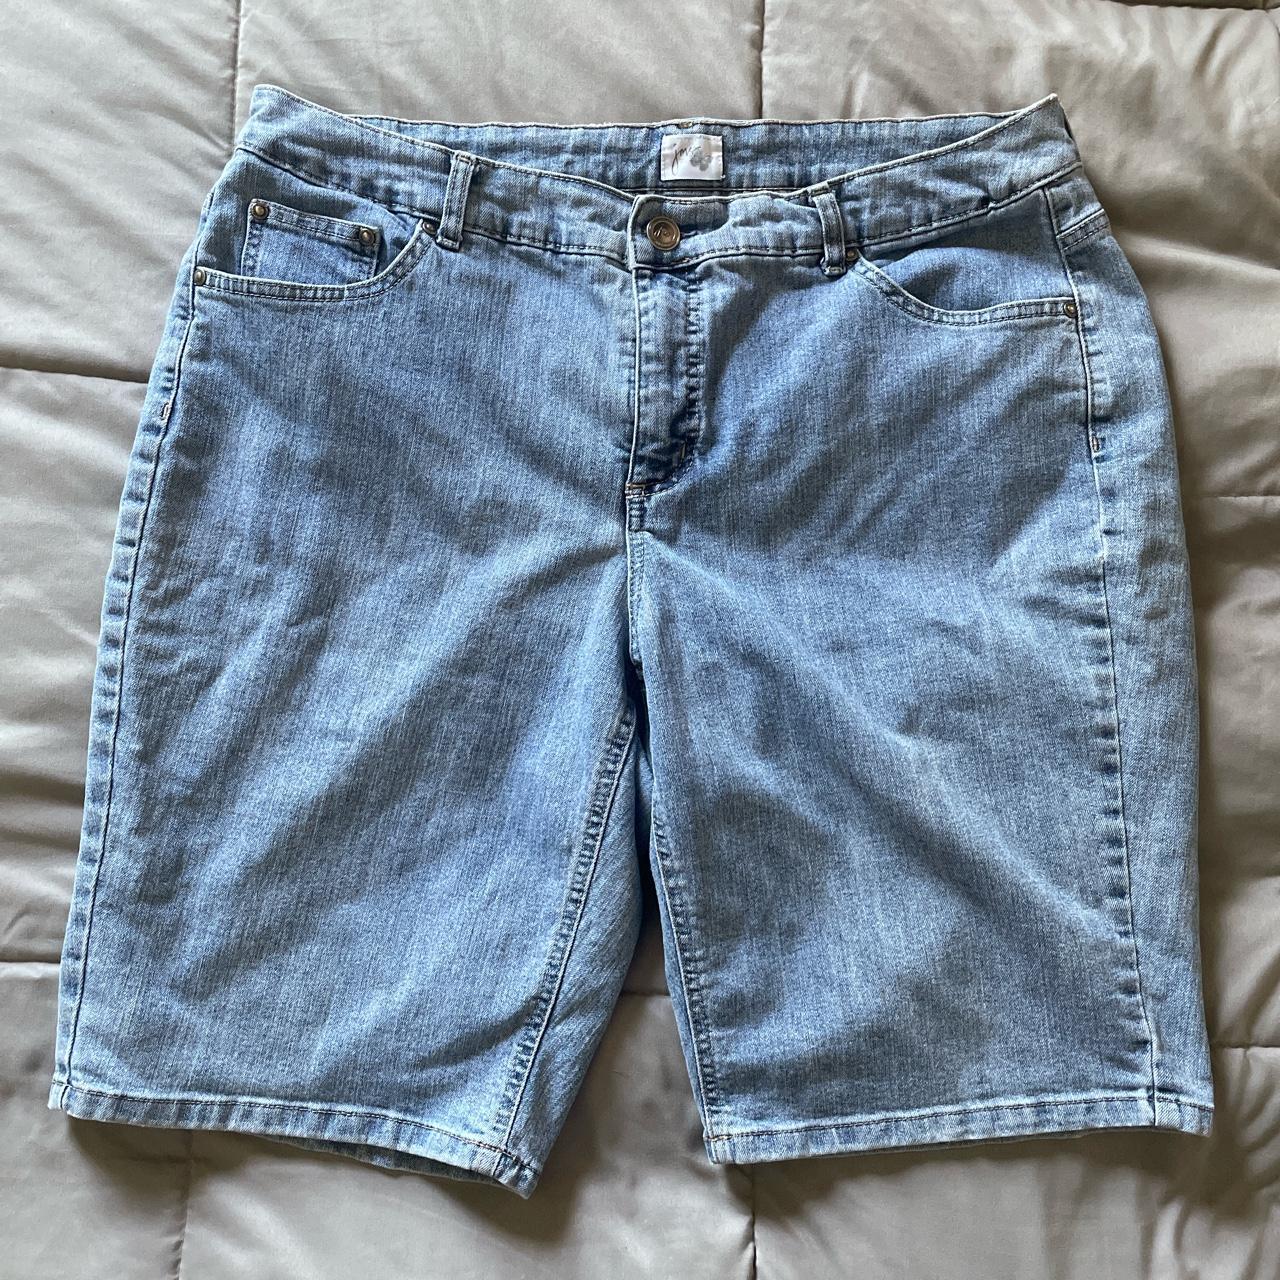 20W long jean shorts with pockets in front and in... - Depop